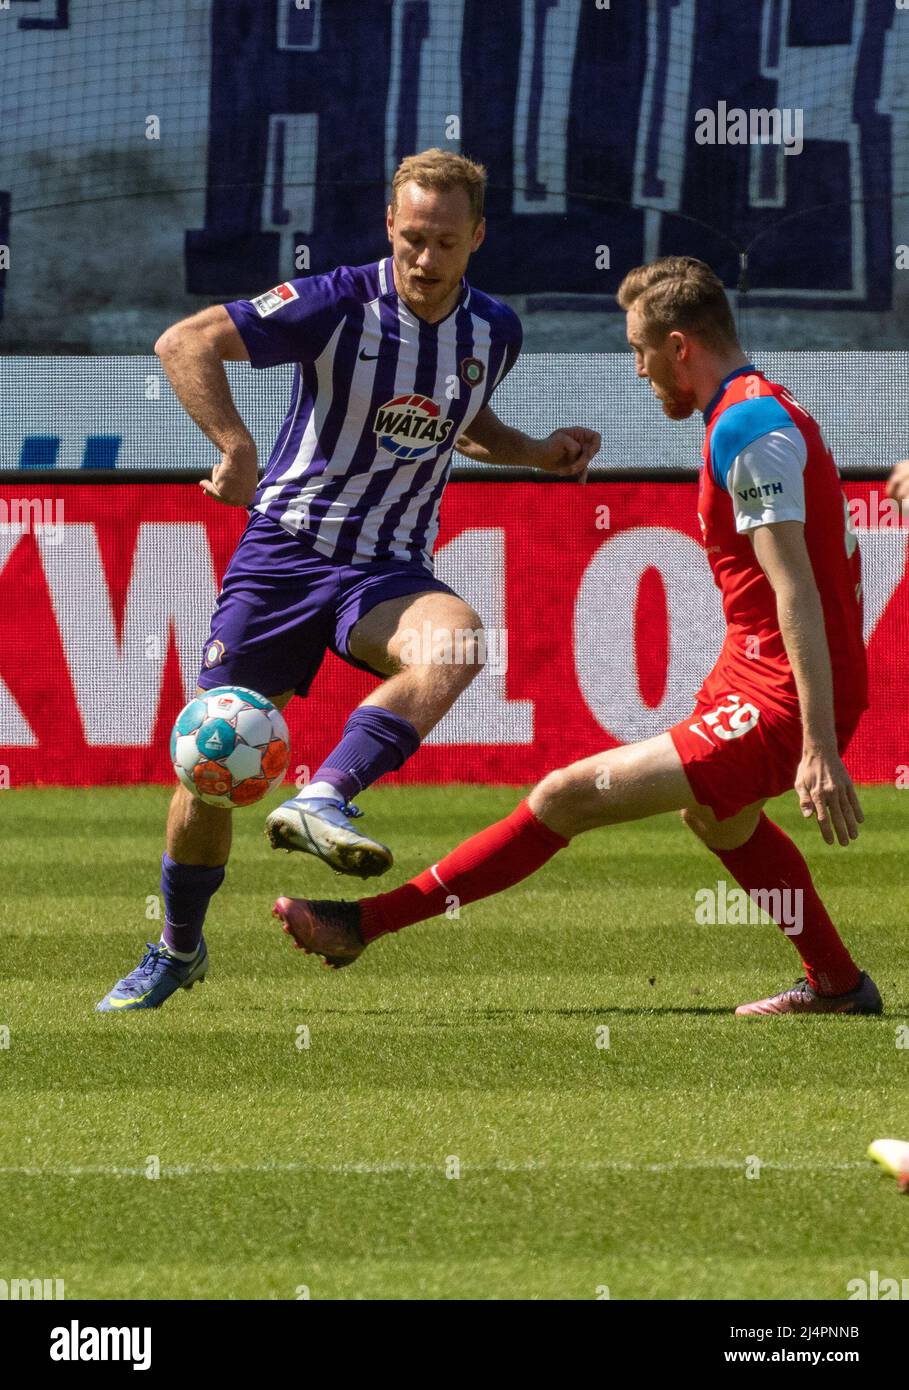 Heidenheim, Germany. 17th Apr, 2022. Soccer: 2nd Bundesliga, 1. FC Heidenheim - Erzgebirge Aue, Matchday 30, Voith Arena. Heidenheim's Tobias Mohr (r) and Aue's Ben Zolinski fight for the ball. Credit: Stefan Puchner/dpa - IMPORTANT NOTE: In accordance with the requirements of the DFL Deutsche Fußball Liga and the DFB Deutscher Fußball-Bund, it is prohibited to use or have used photographs taken in the stadium and/or of the match in the form of sequence pictures and/or video-like photo series./dpa/Alamy Live News Stock Photo